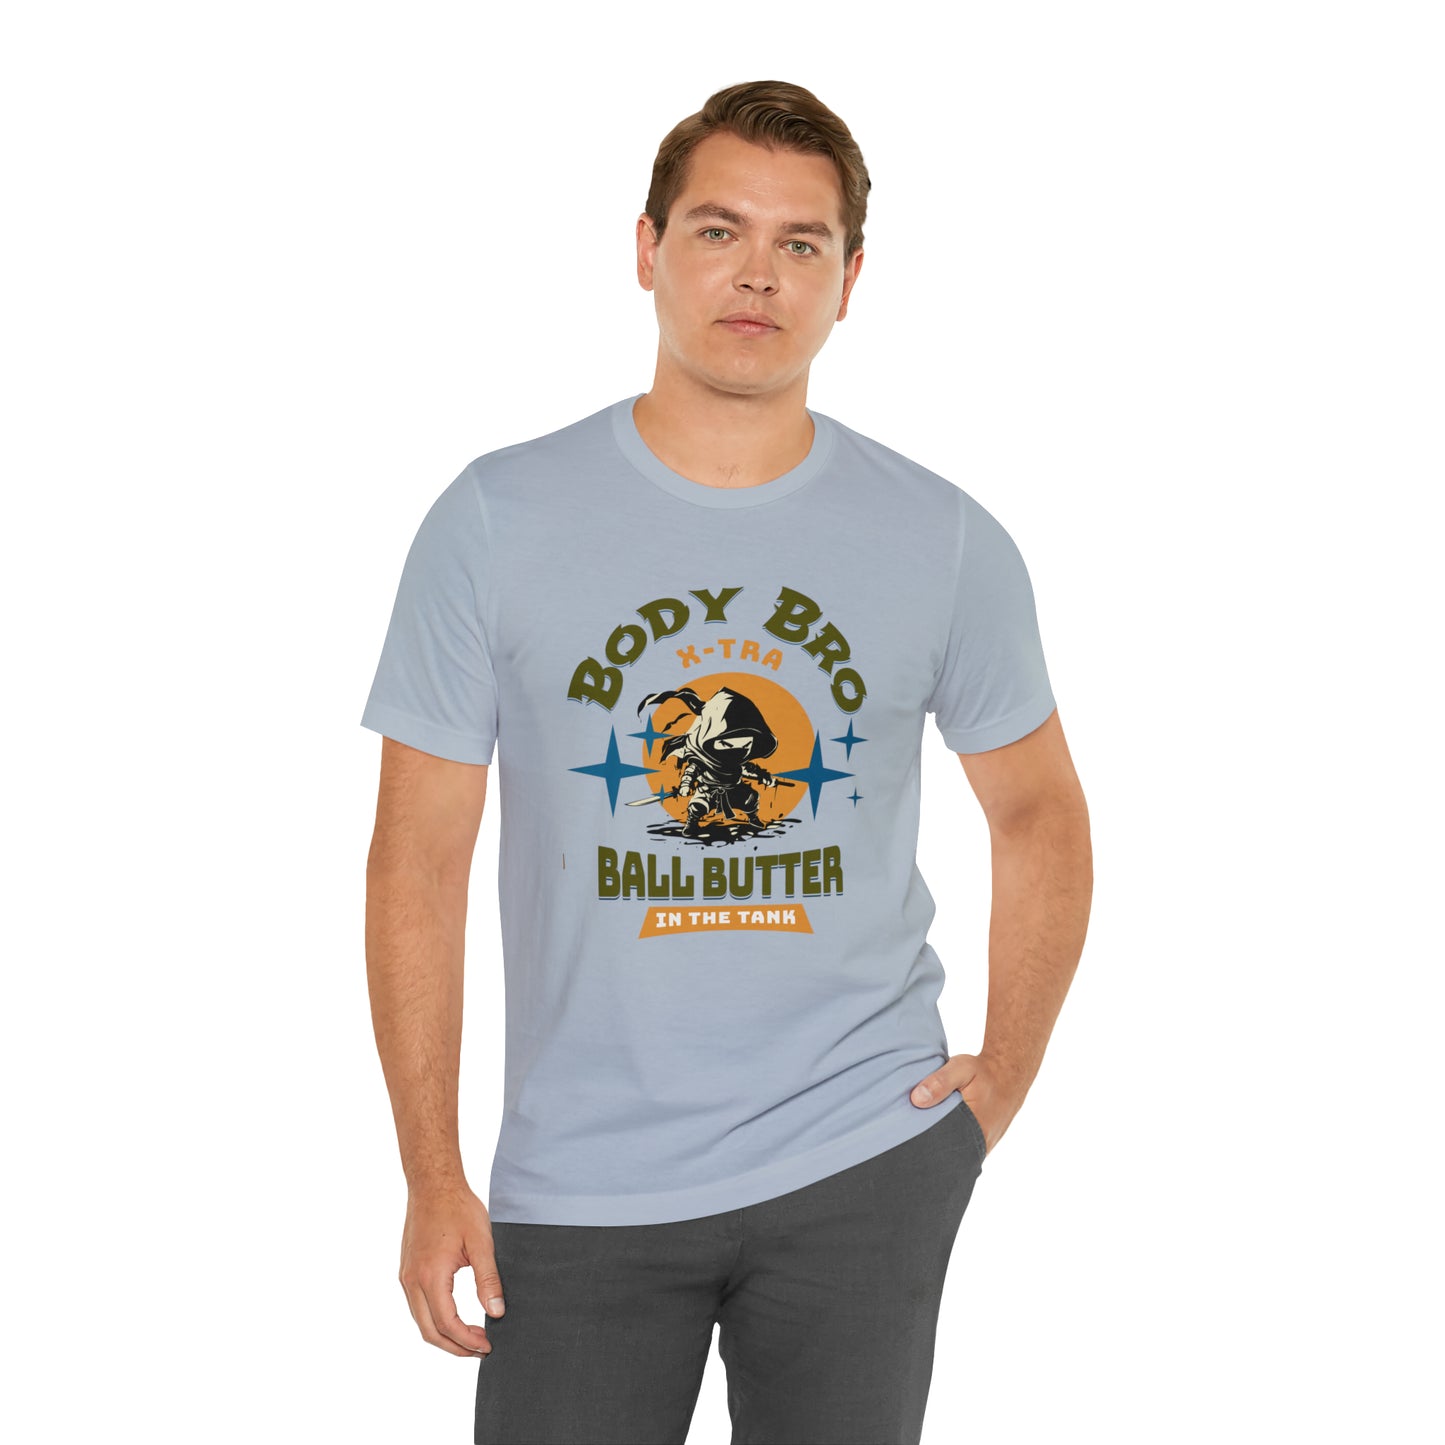 Extra Ball Butter in the Tank Unisex Jersey Short Sleeve Tee